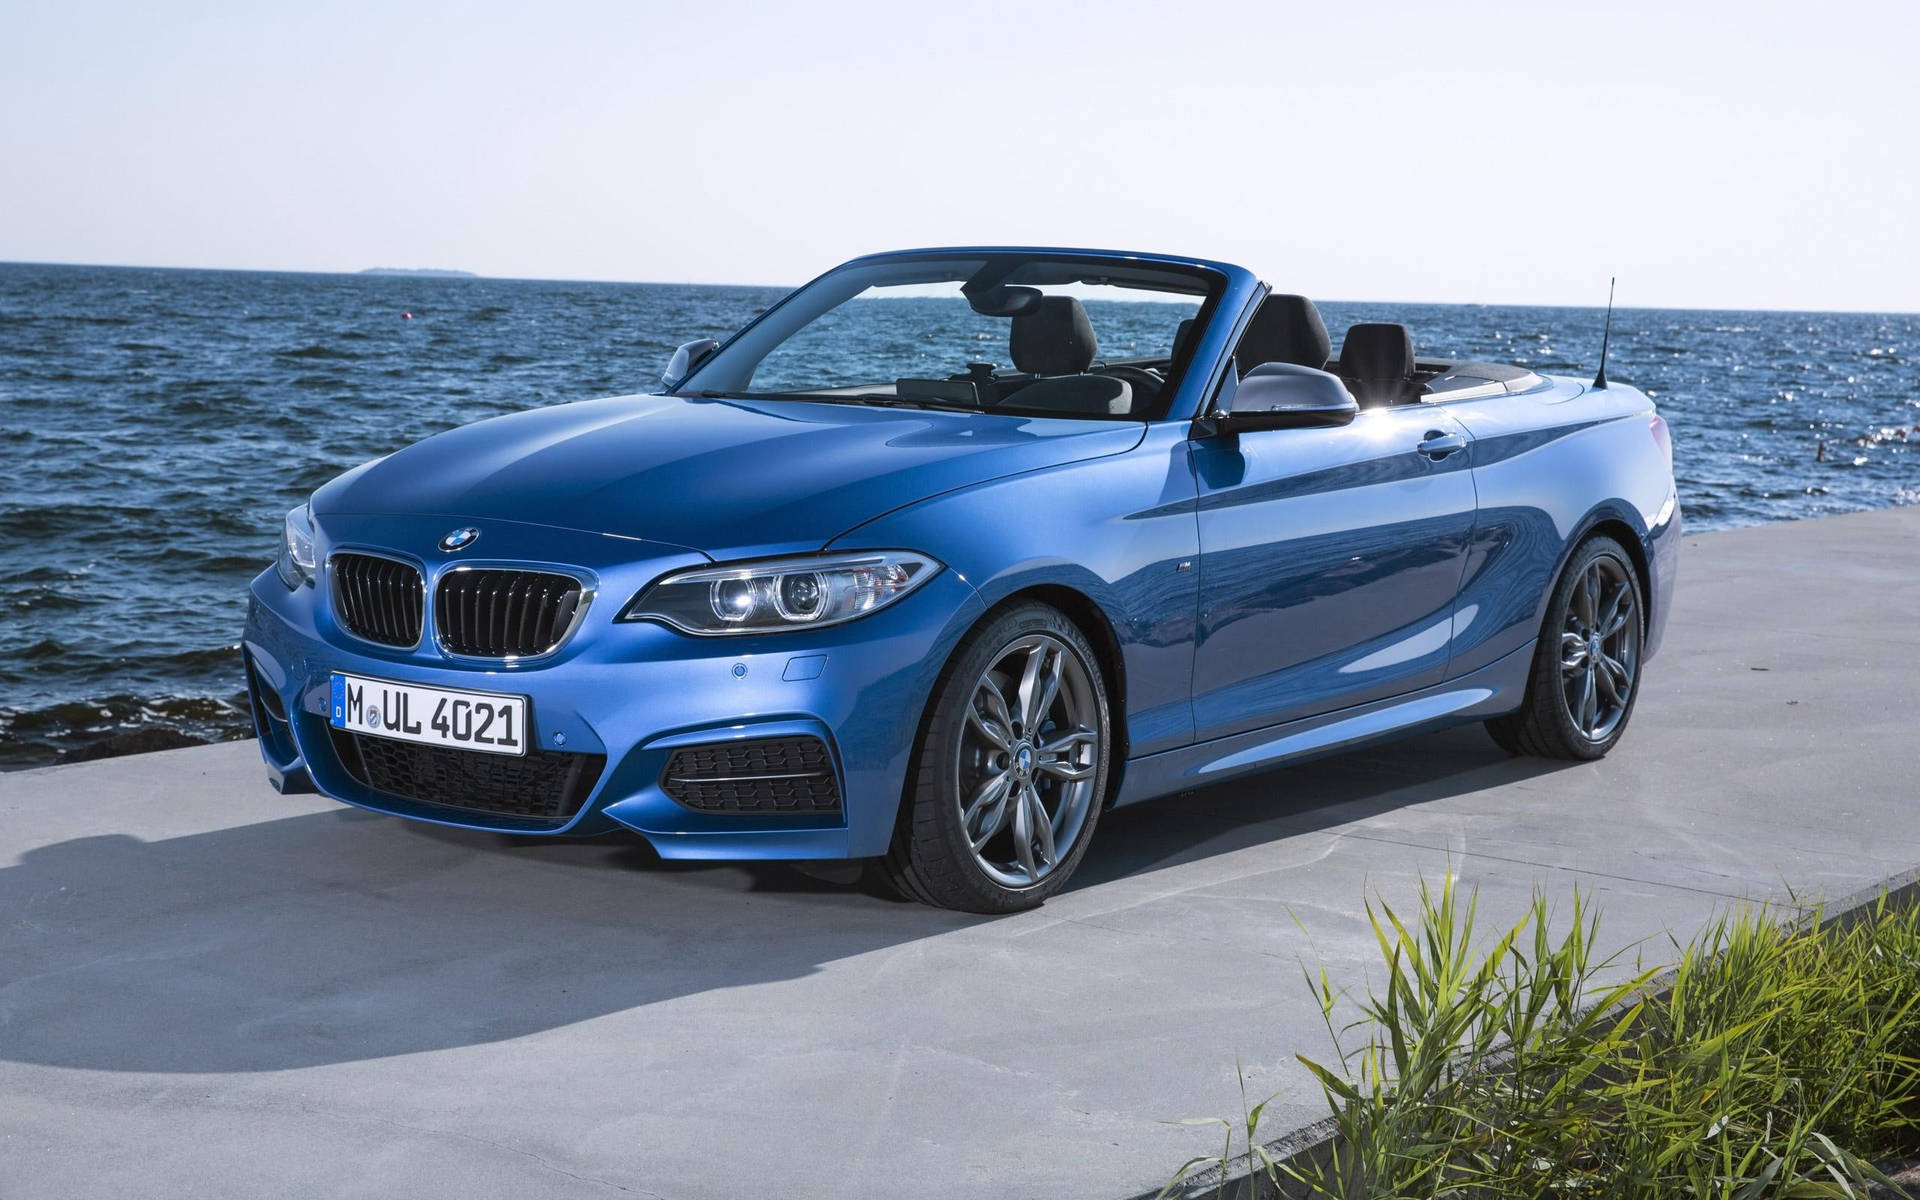 The 2023 Bmw M4 Luxury Sports Car Showcasing Its Sleek Design And Muscular Stance.